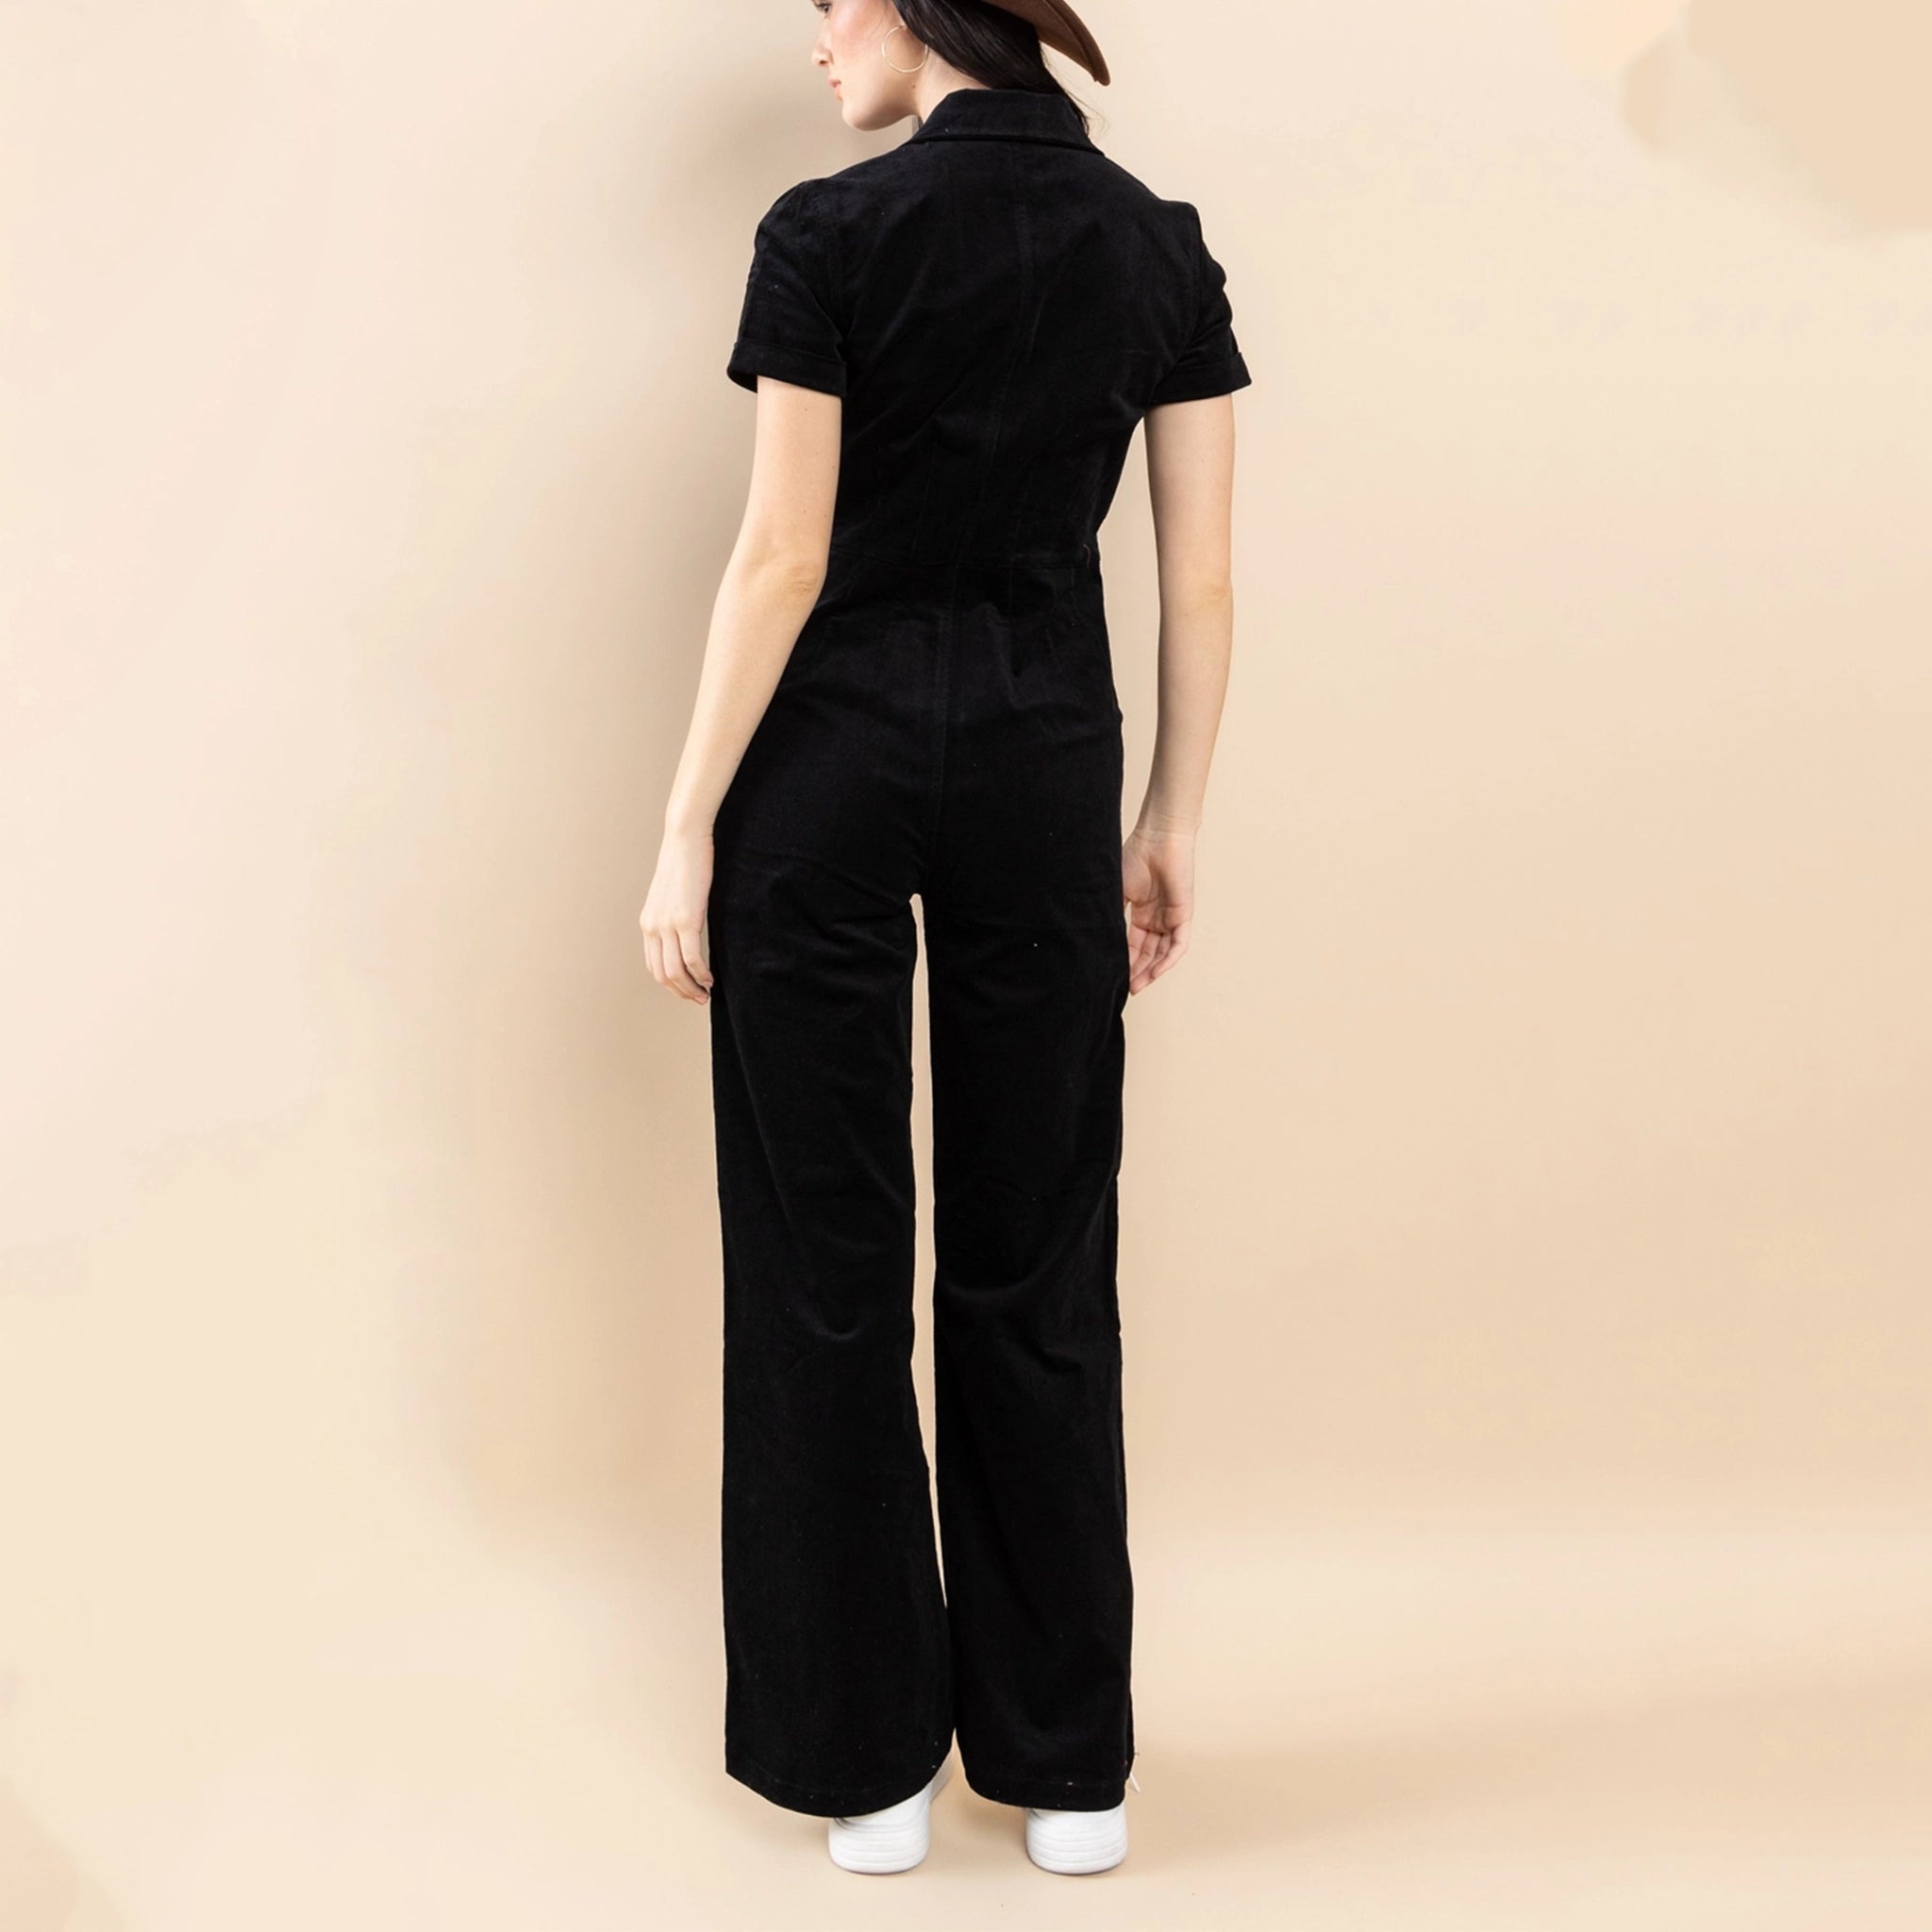 On a neutral background is a model wearing a black short sleeve jumpsuit with a front zipper.